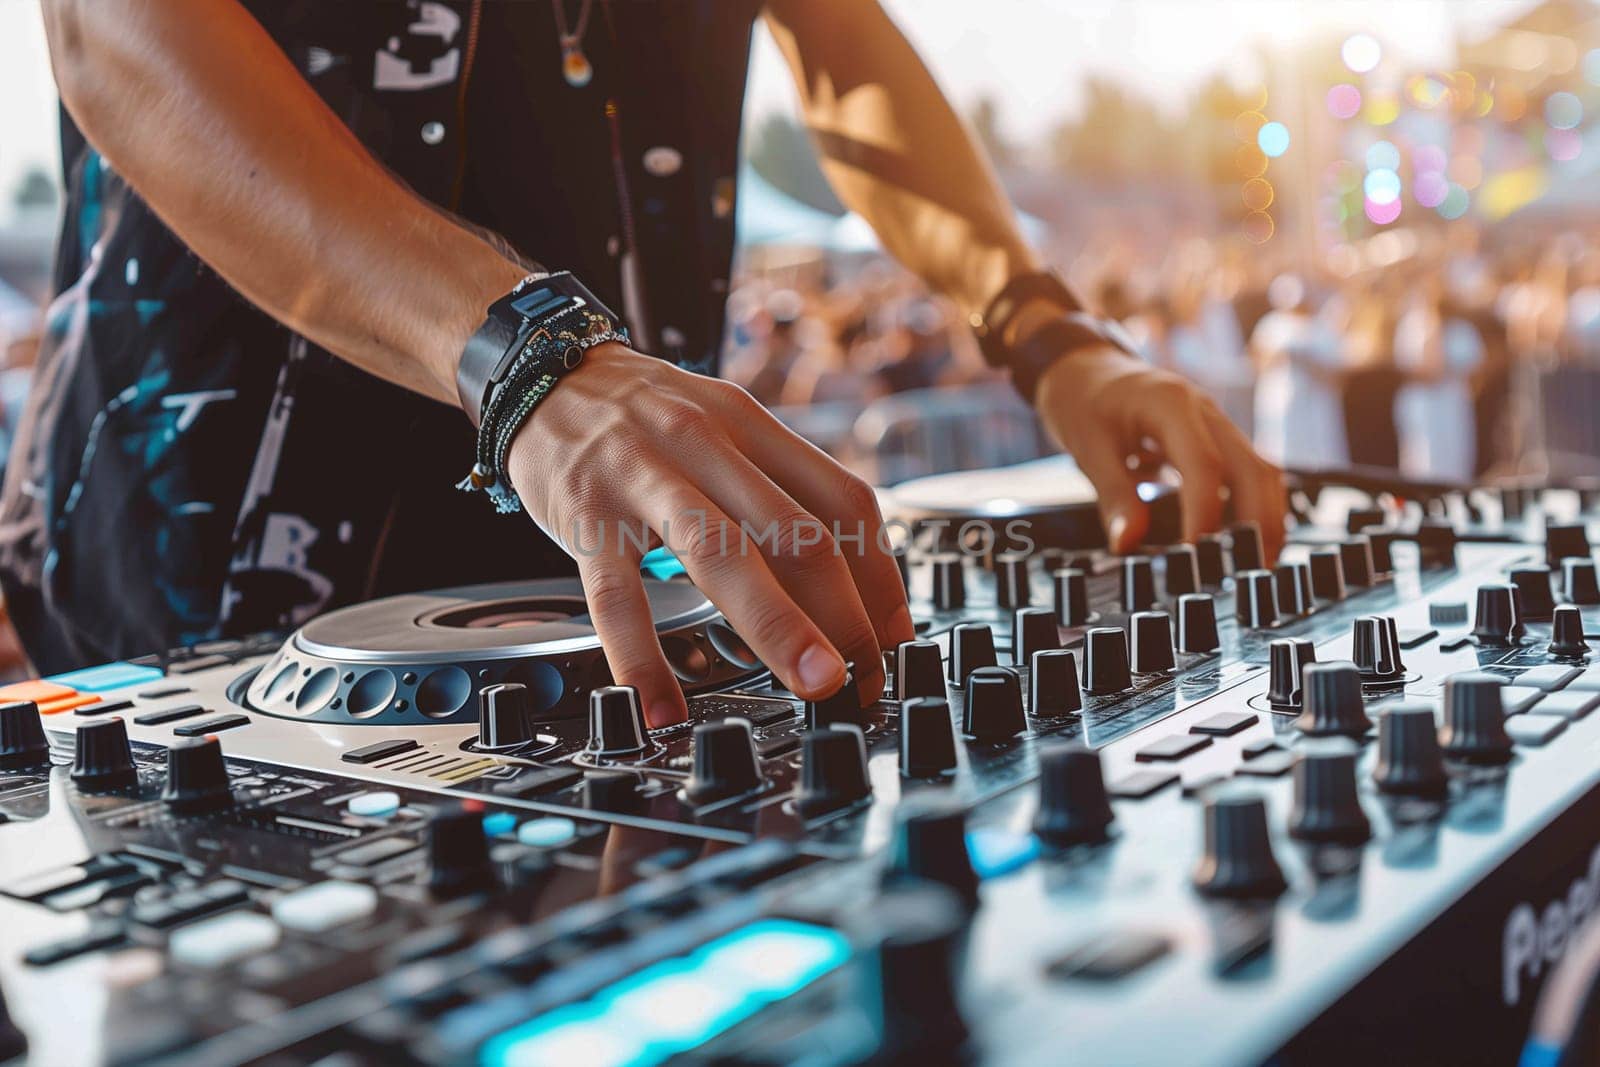 A DJ is energetically mixing music on stage in front of a large crowd at a music festival.